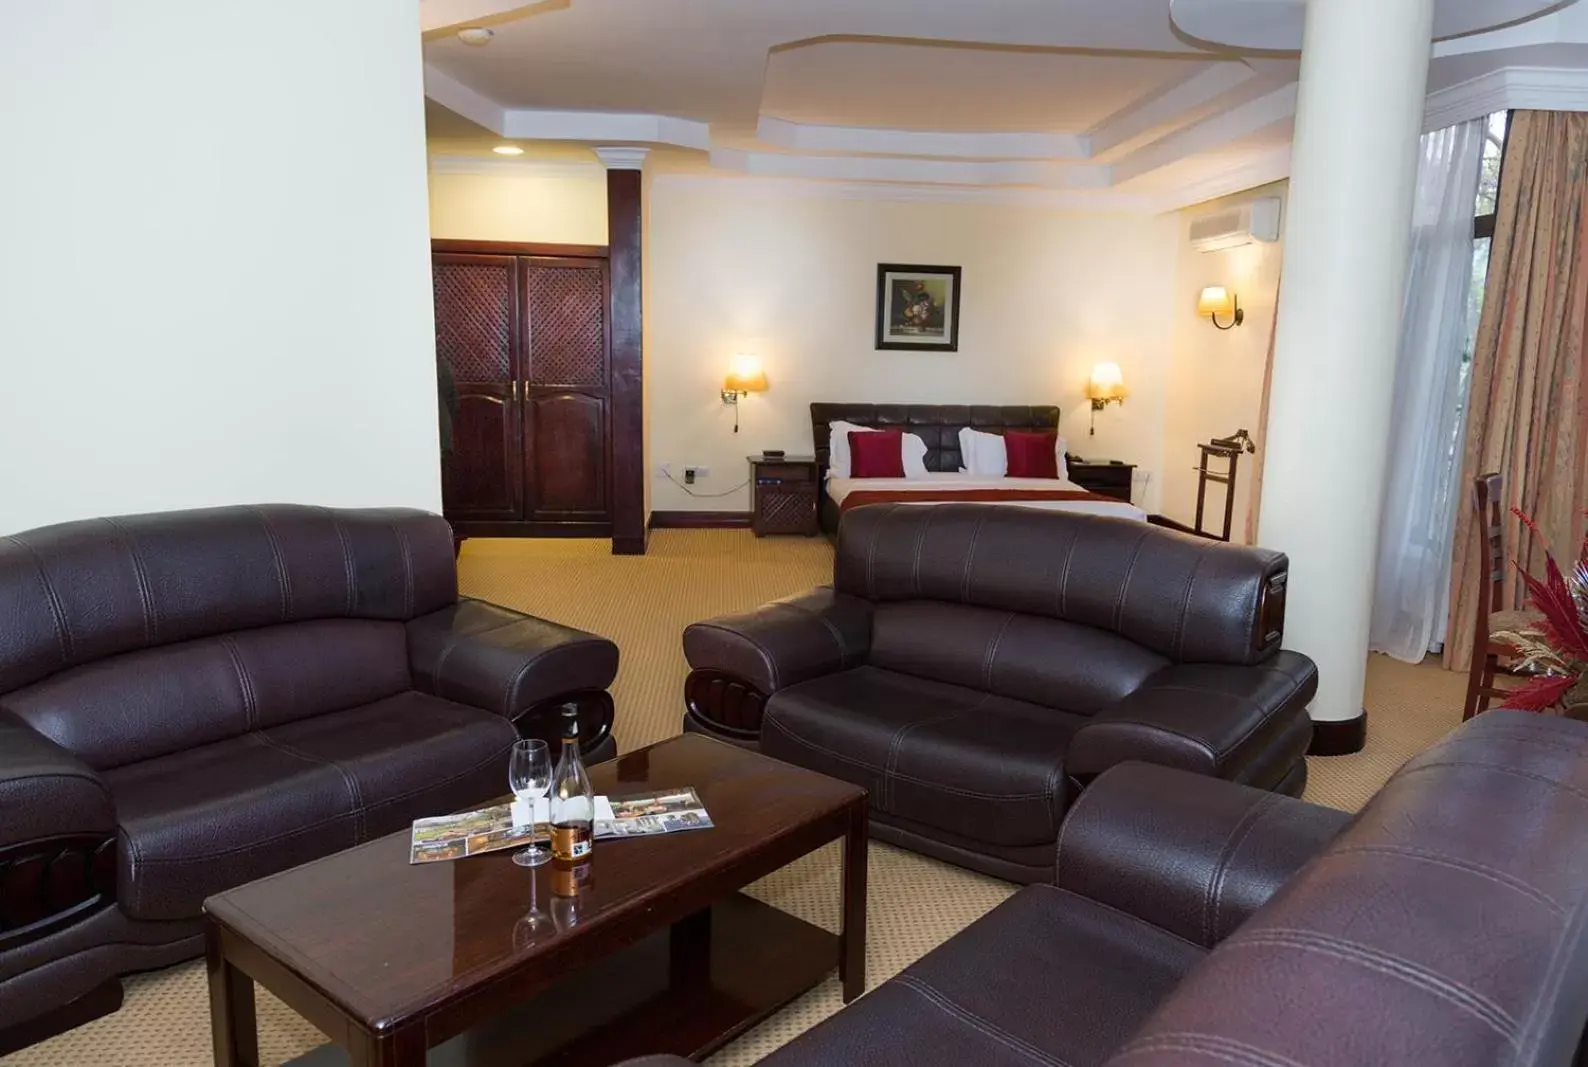 Deluxe Suite in Kibo Palace Hotel Arusha